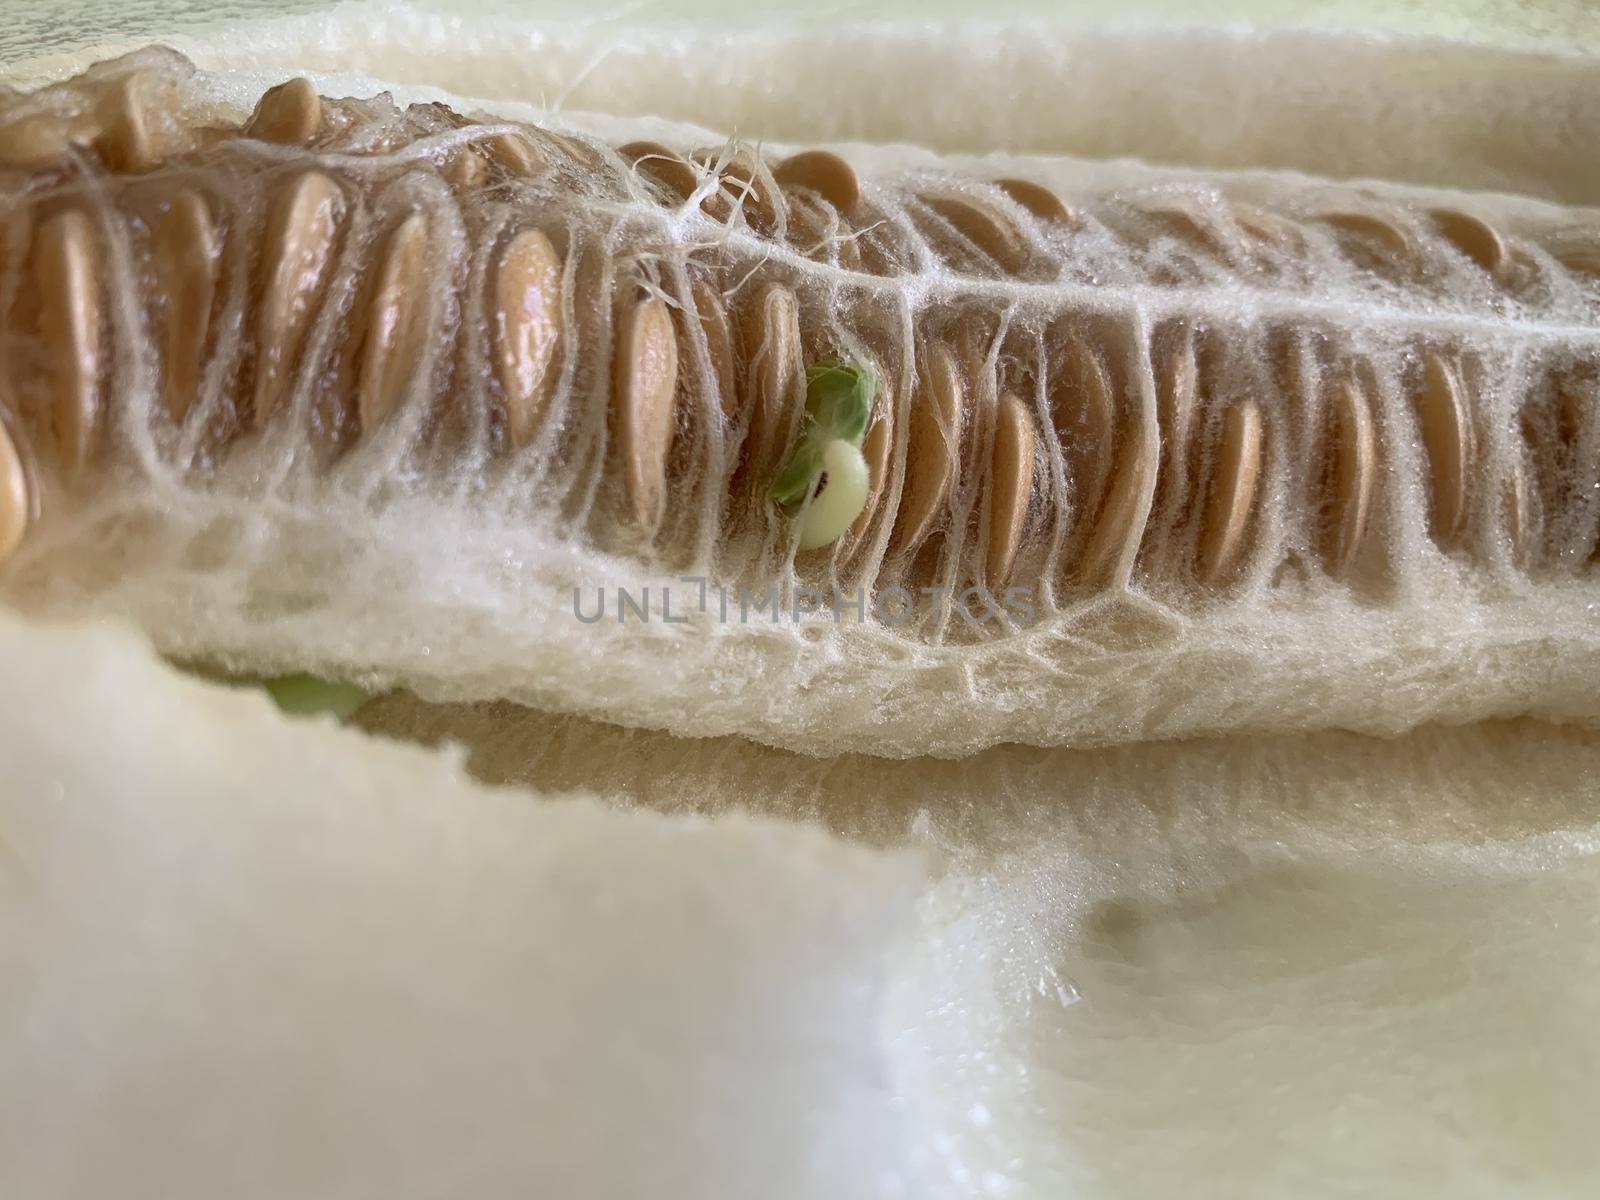 a green sprout in the seeds of a cut melon by Eldashev